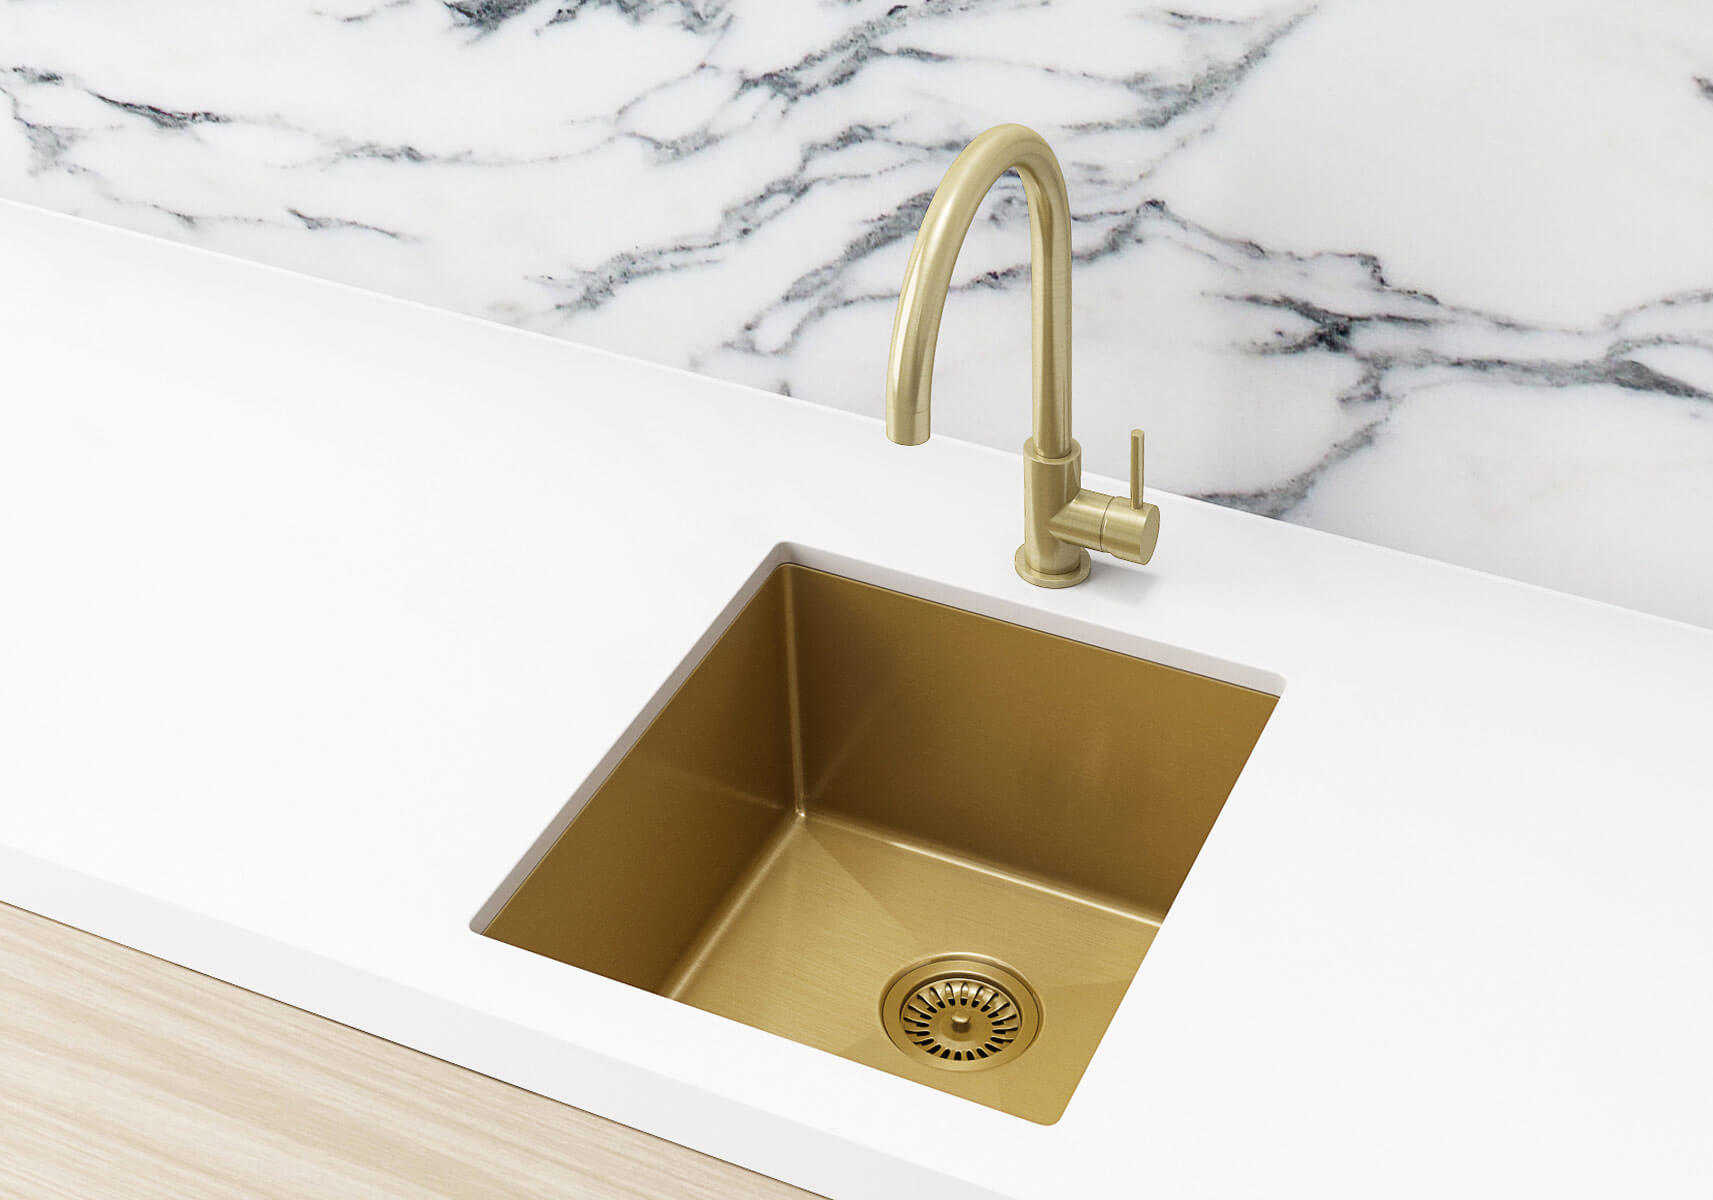 MKSP S380440 BB Stainless Single Bowl PVD Kitchen Sink By Meir In Gold 380x440x200mm2 